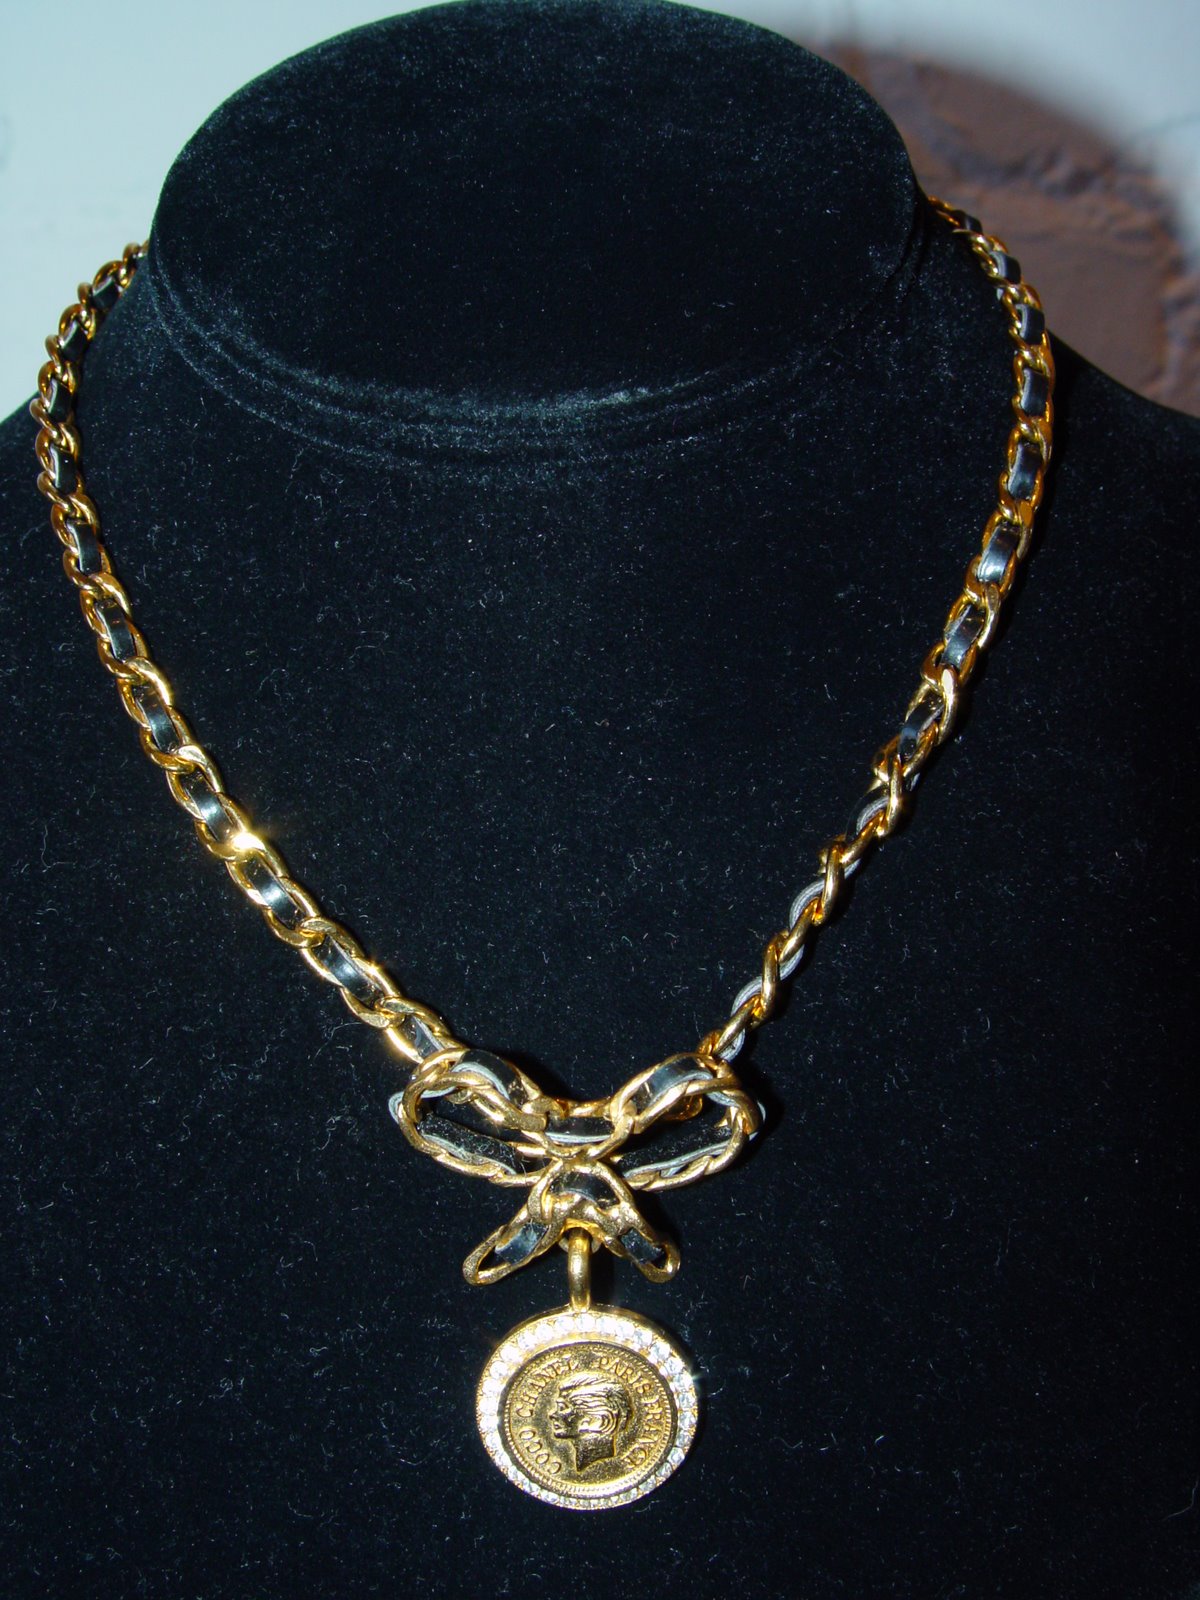 [CHANEL+CHAIN+AND+LEATHER+WEOVEN+NECKLACE+TO+BOW+WITH+CHANEL+SILHOUETTE+COIN+SURROUNDED+BY+RHINESTONES+1996+SPRING.JPG.JPG]